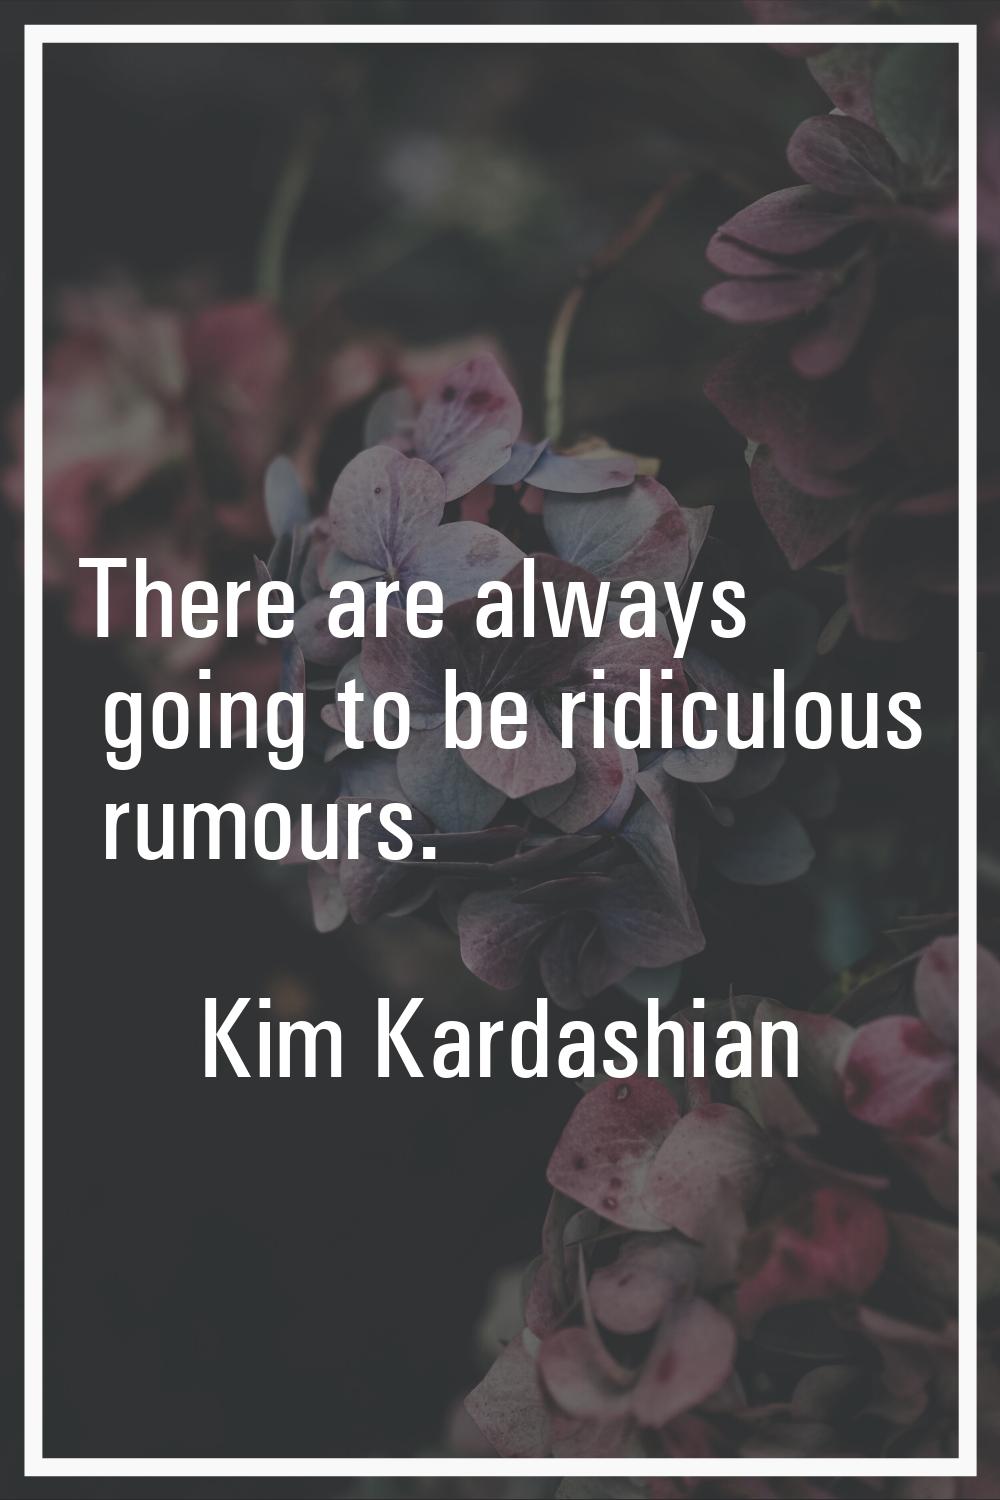 There are always going to be ridiculous rumours.